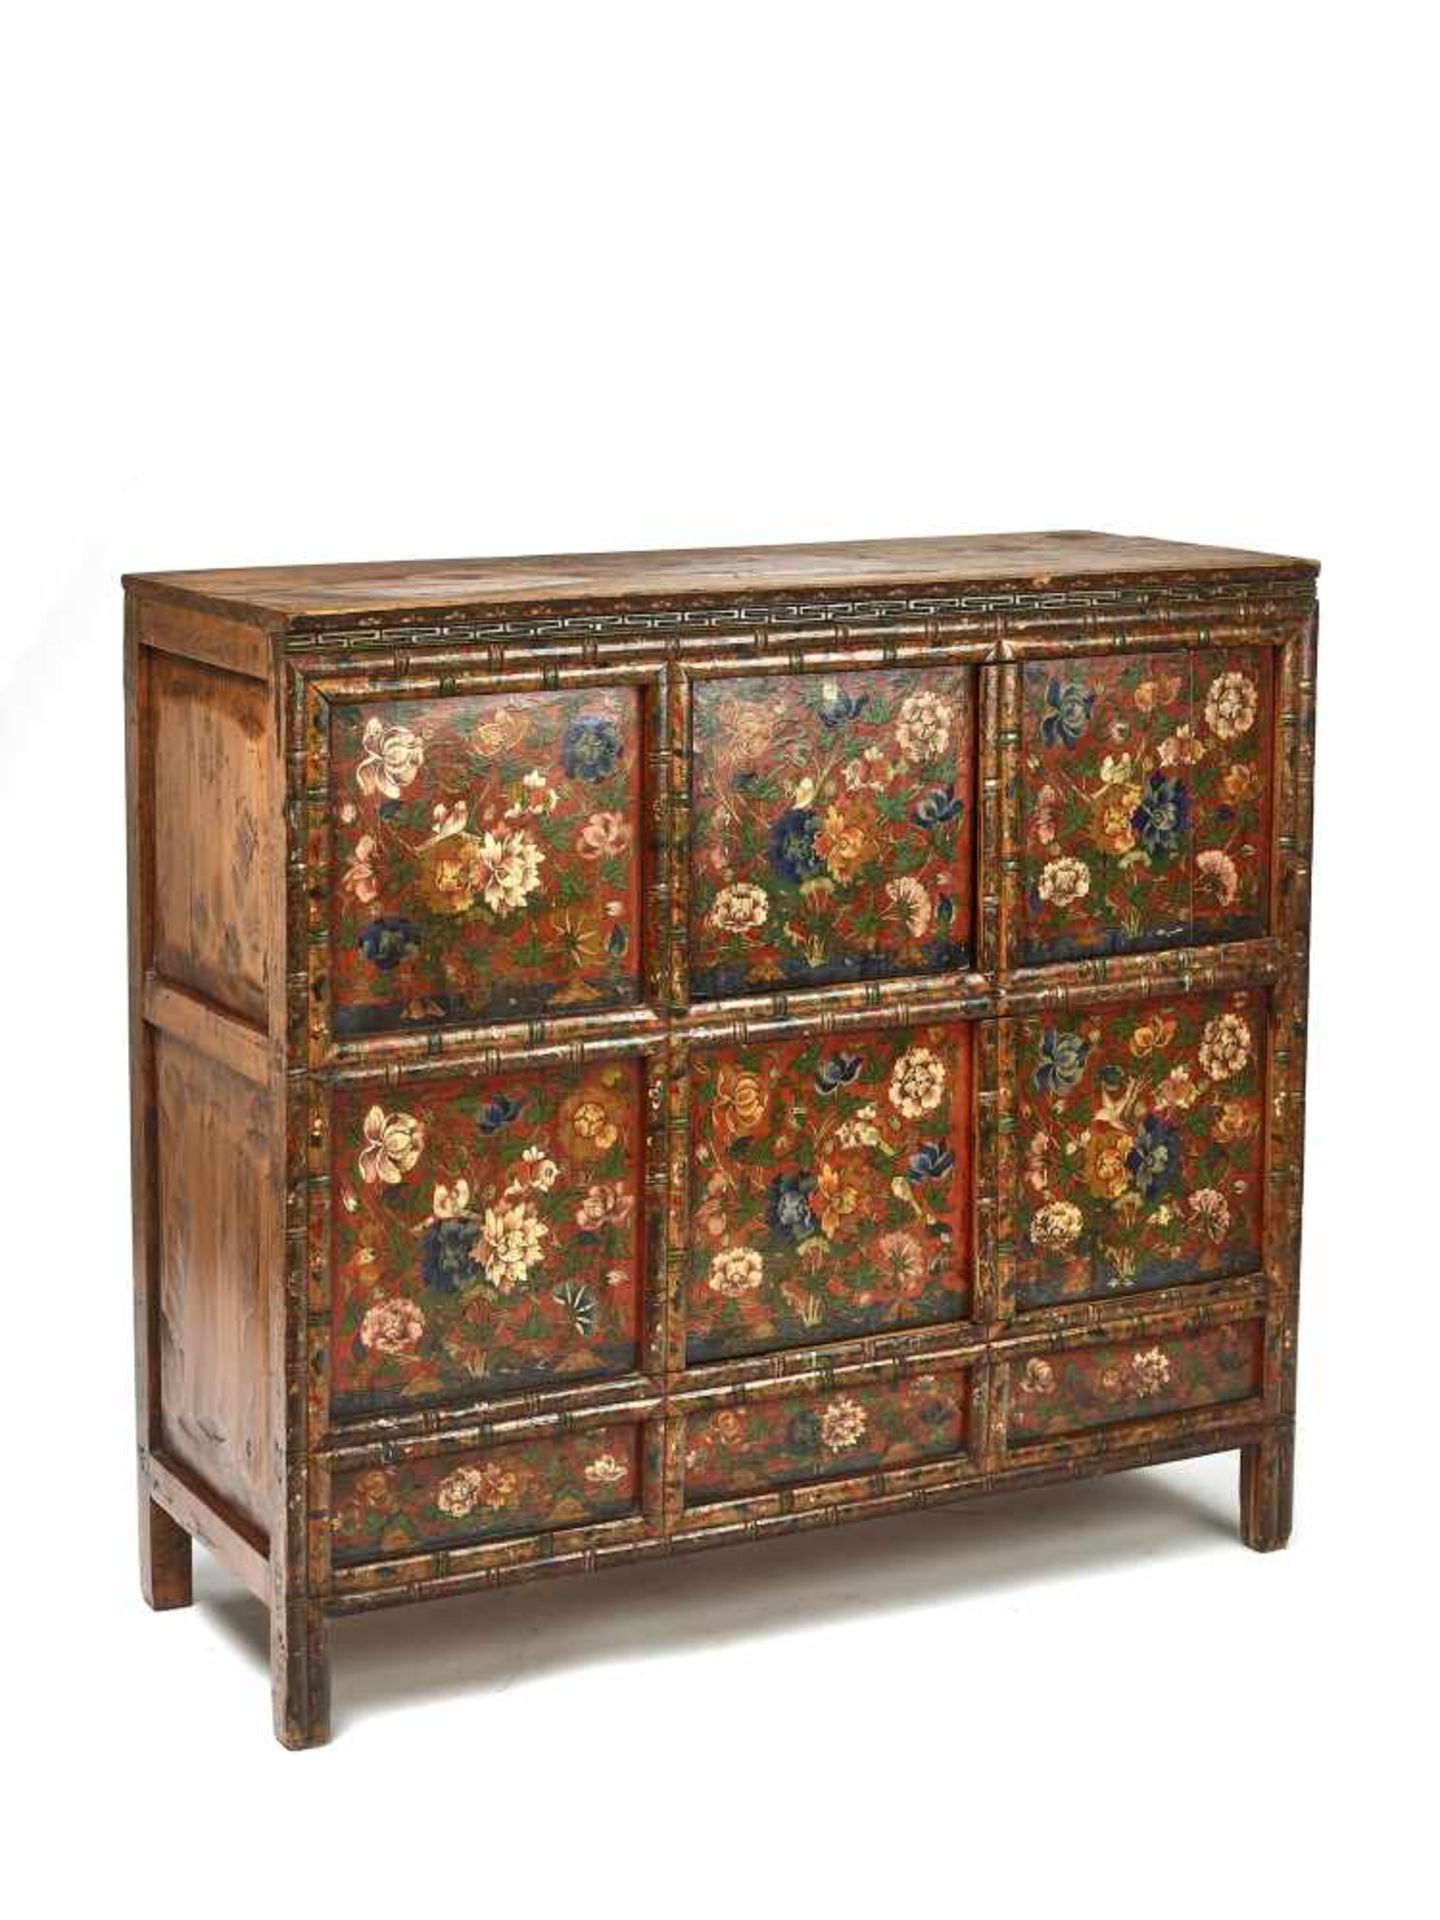 A RARE AND LARGE TIBETAN LACQUERED HARDWOOD CABINET, 19TH CENTURYNicely painted original lacquer - Image 2 of 5